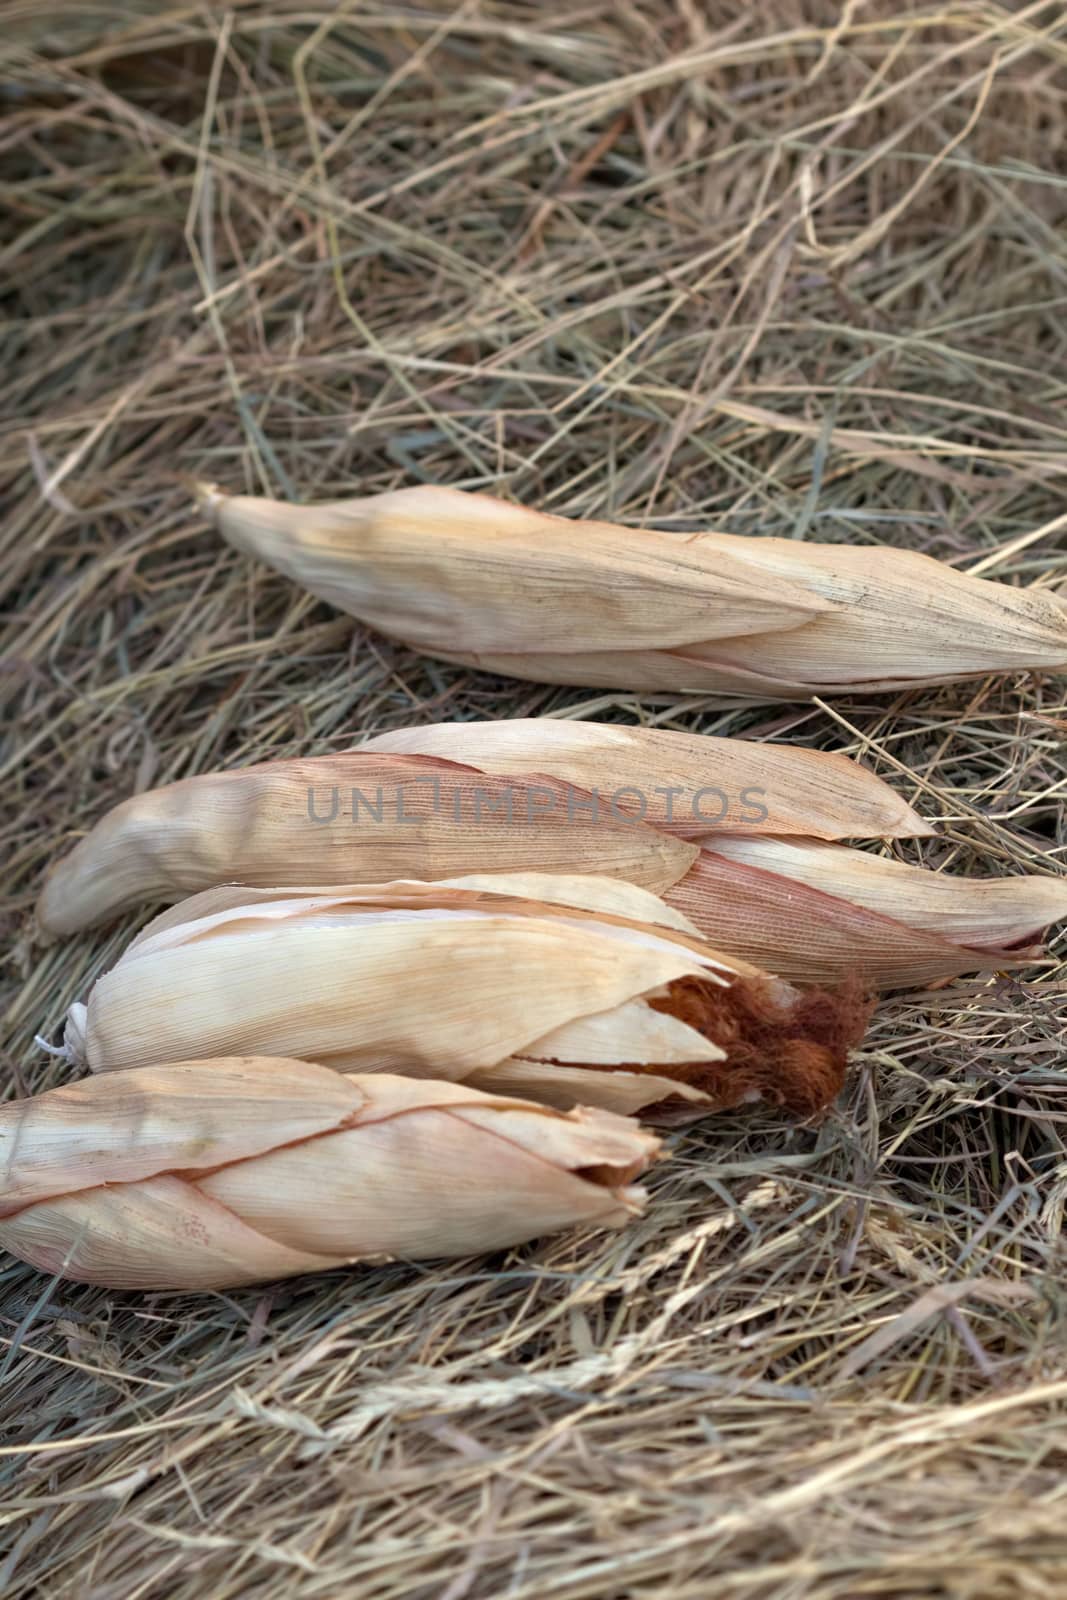 untreated, in dry leaves, corn cobs lie on the hay. Vertical frame. Image with selective focus. Agriculture background.